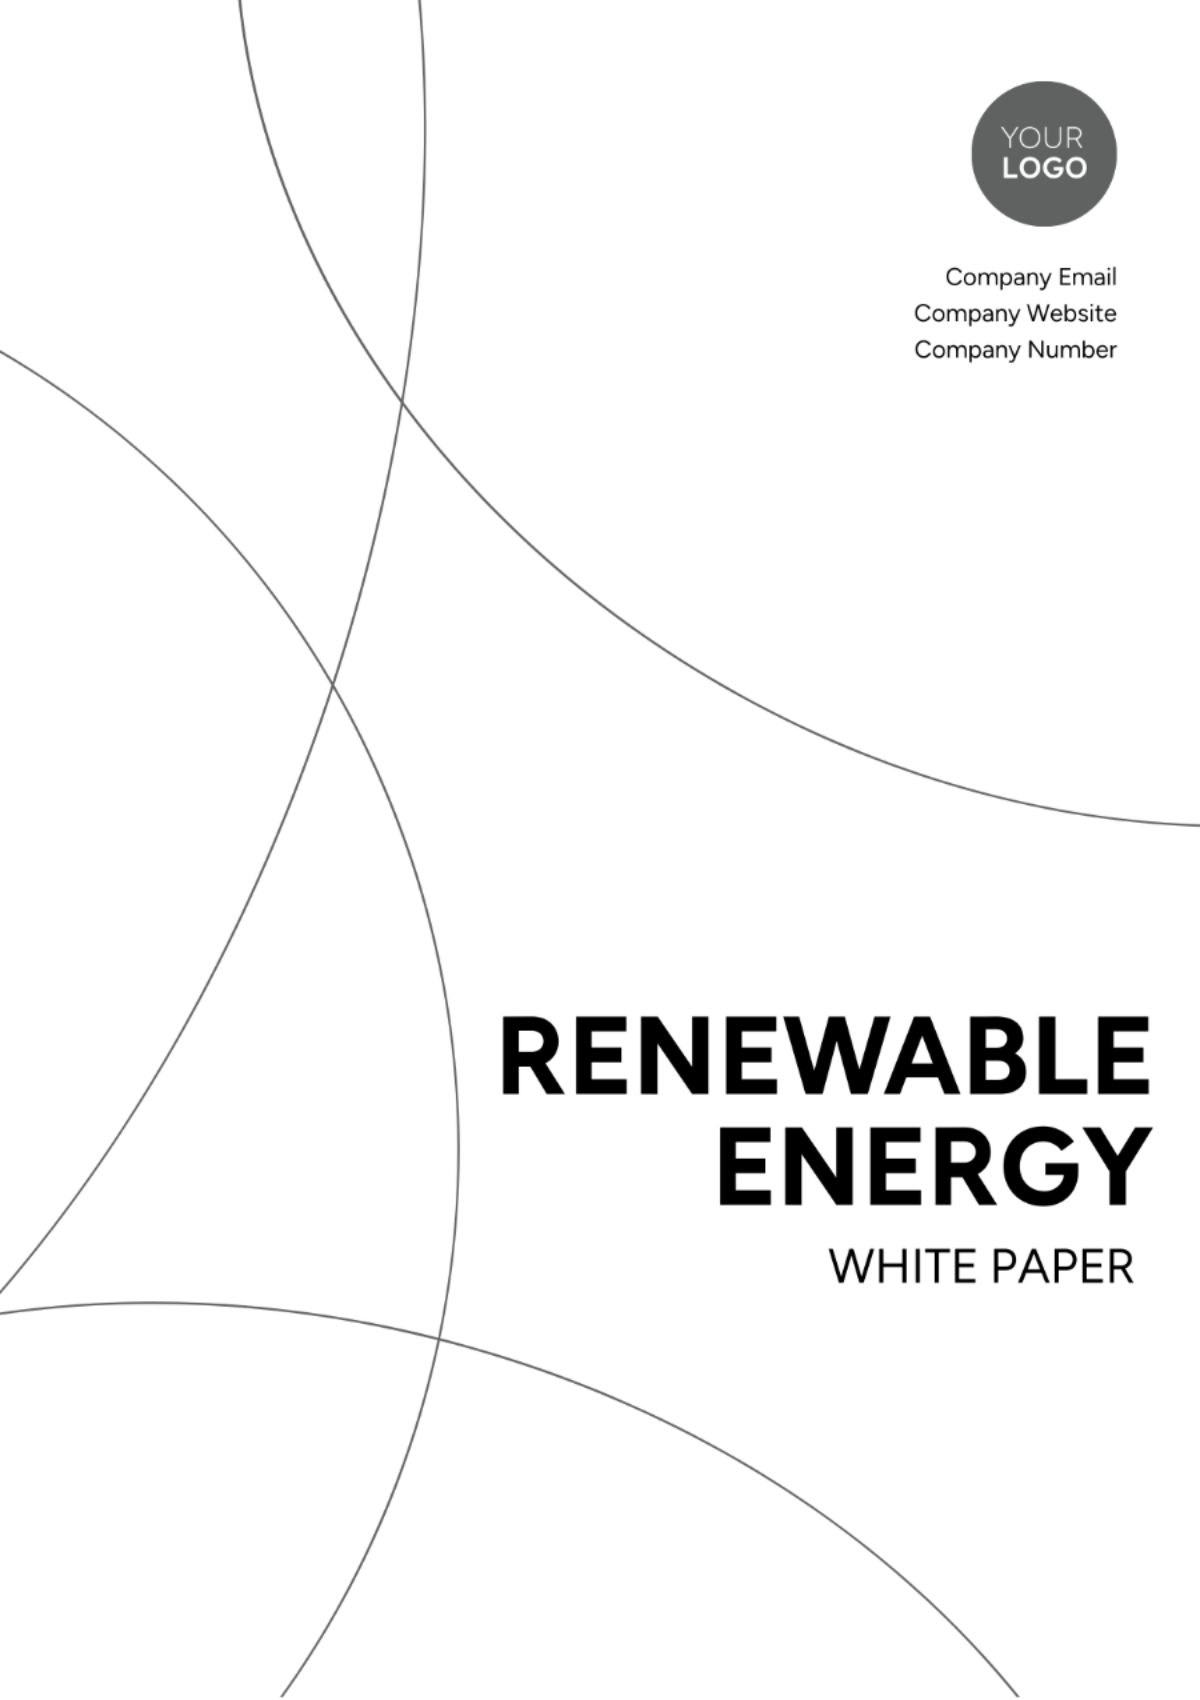 Renewable Energy White Paper Template